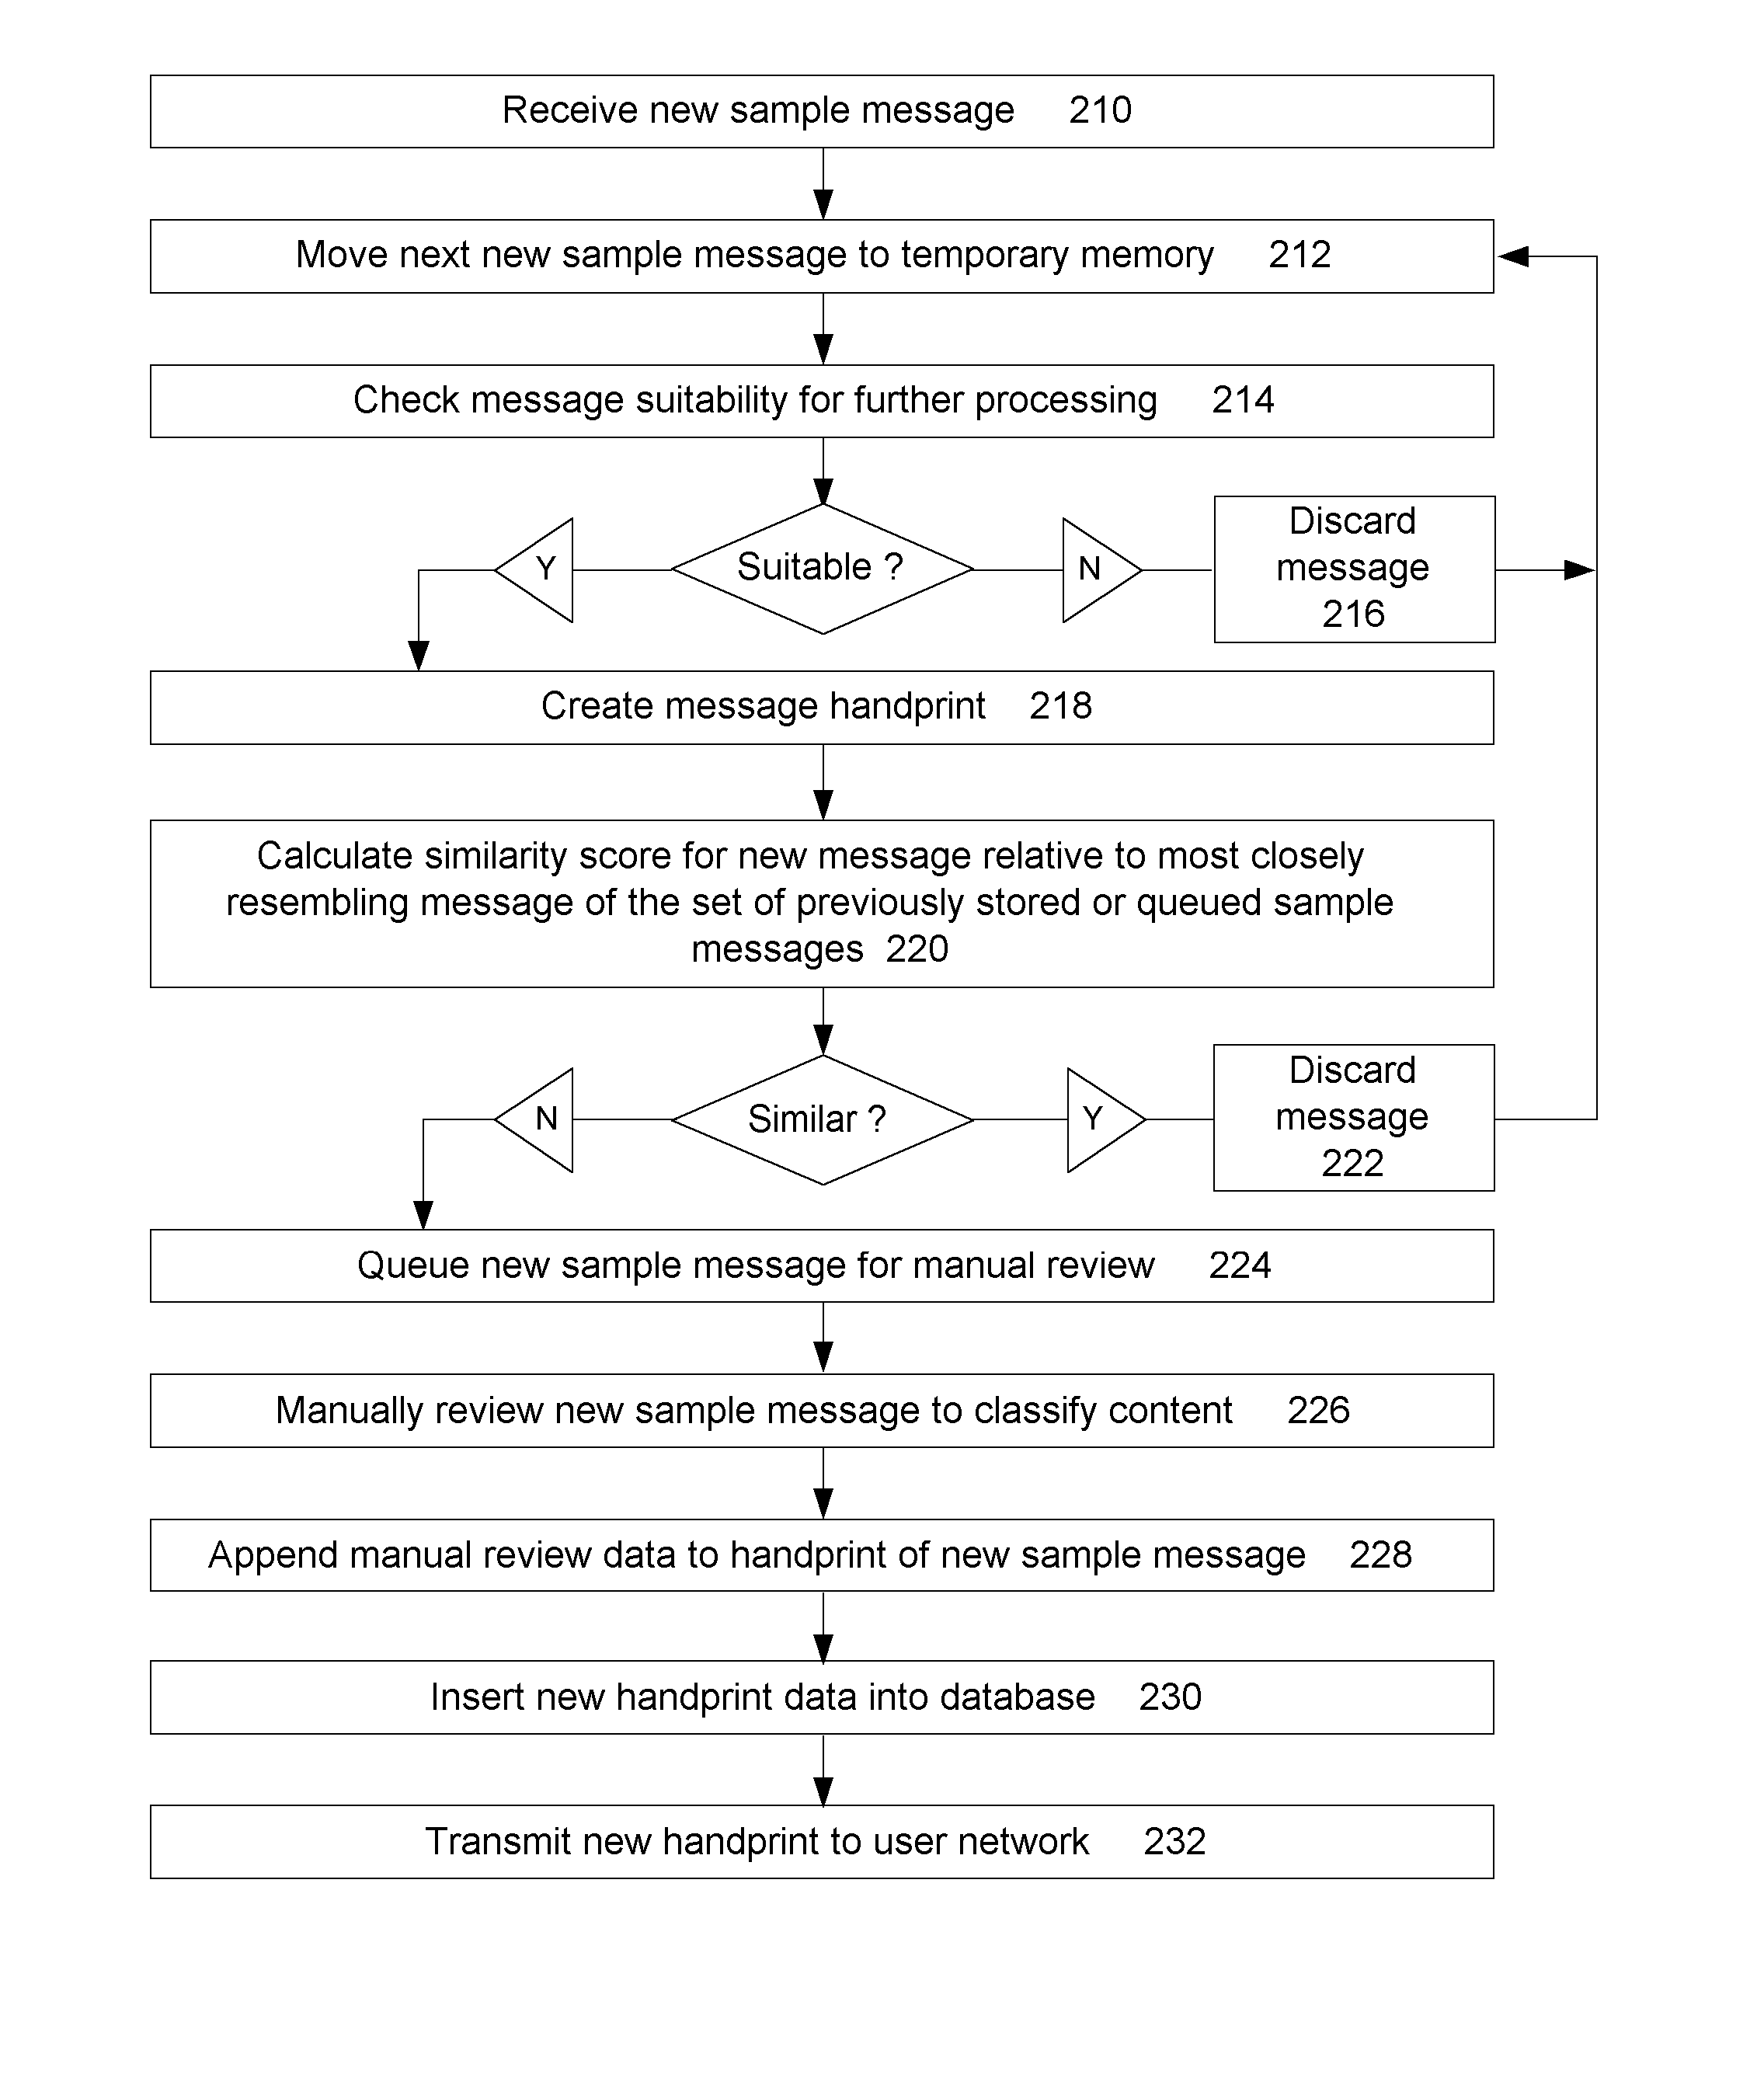 Document similarity detection and classification system